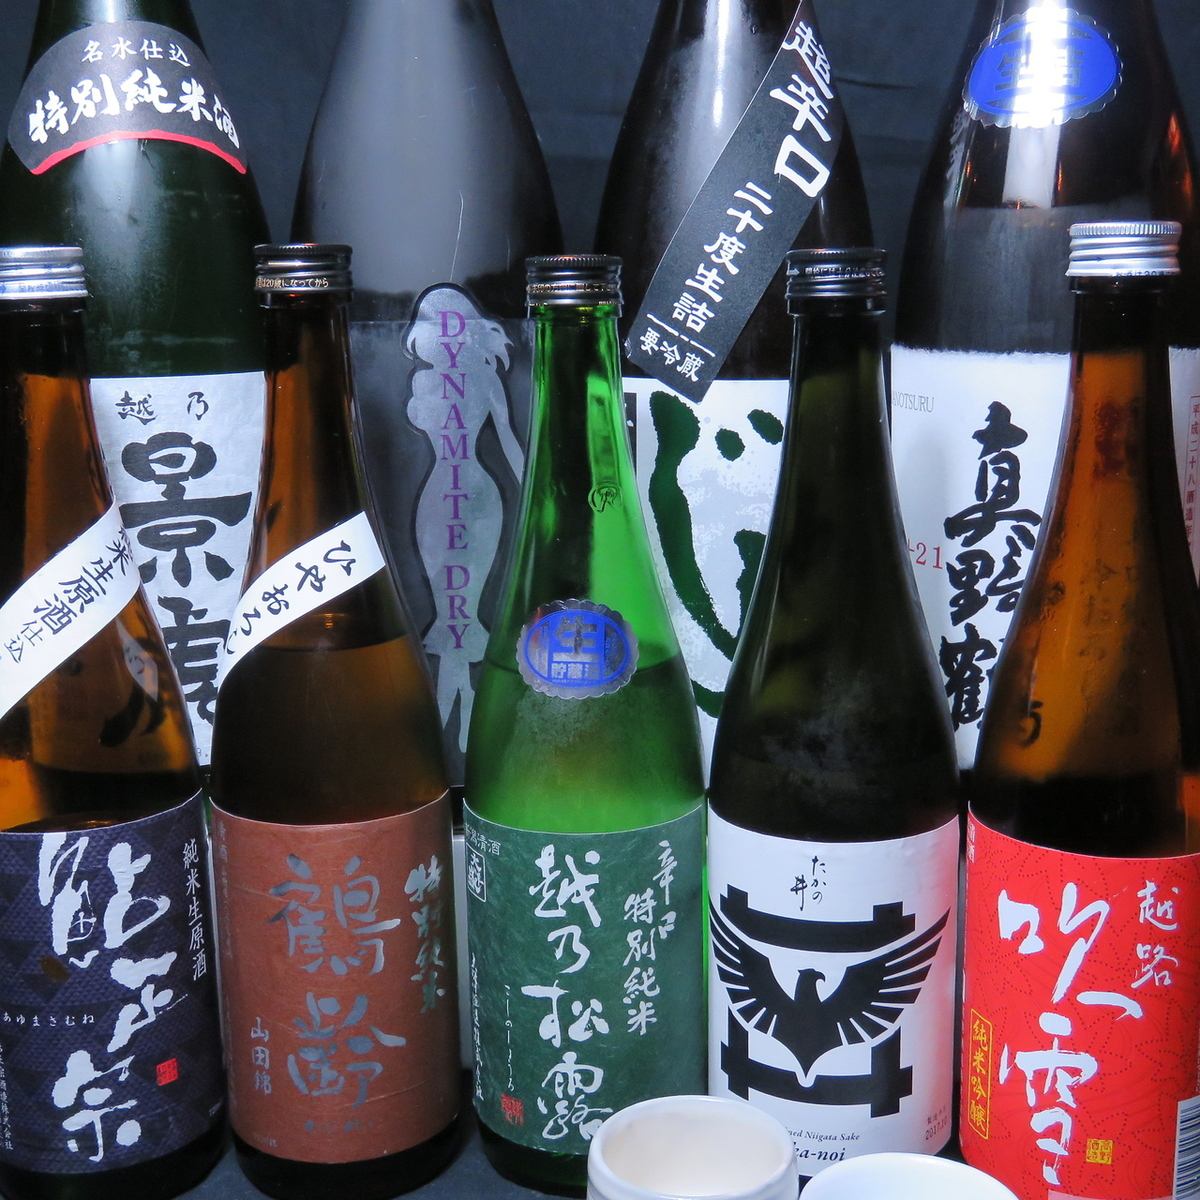 70 types of Niigata local sake are always available!